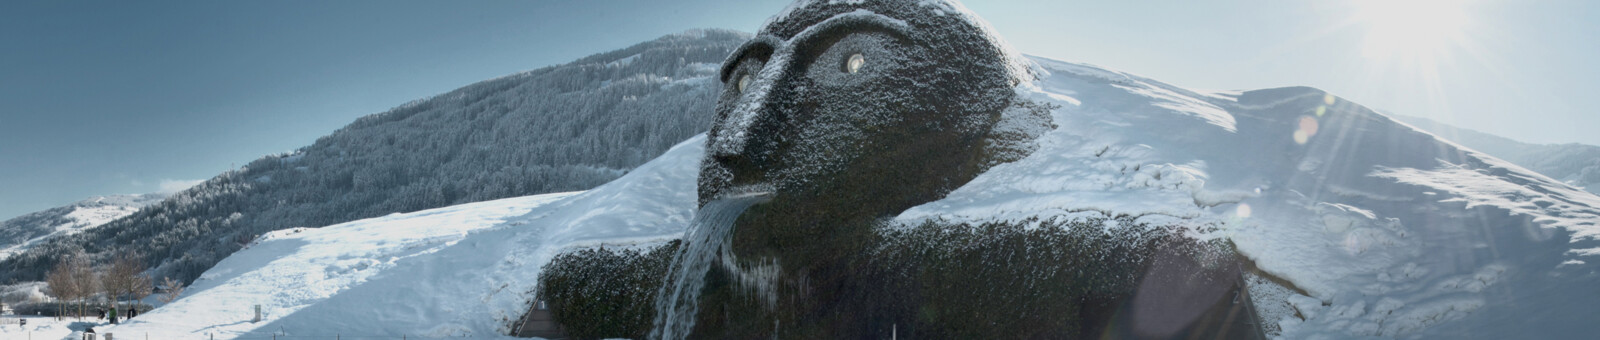     The Giant at Swarovski Crystal Worlds in winter 